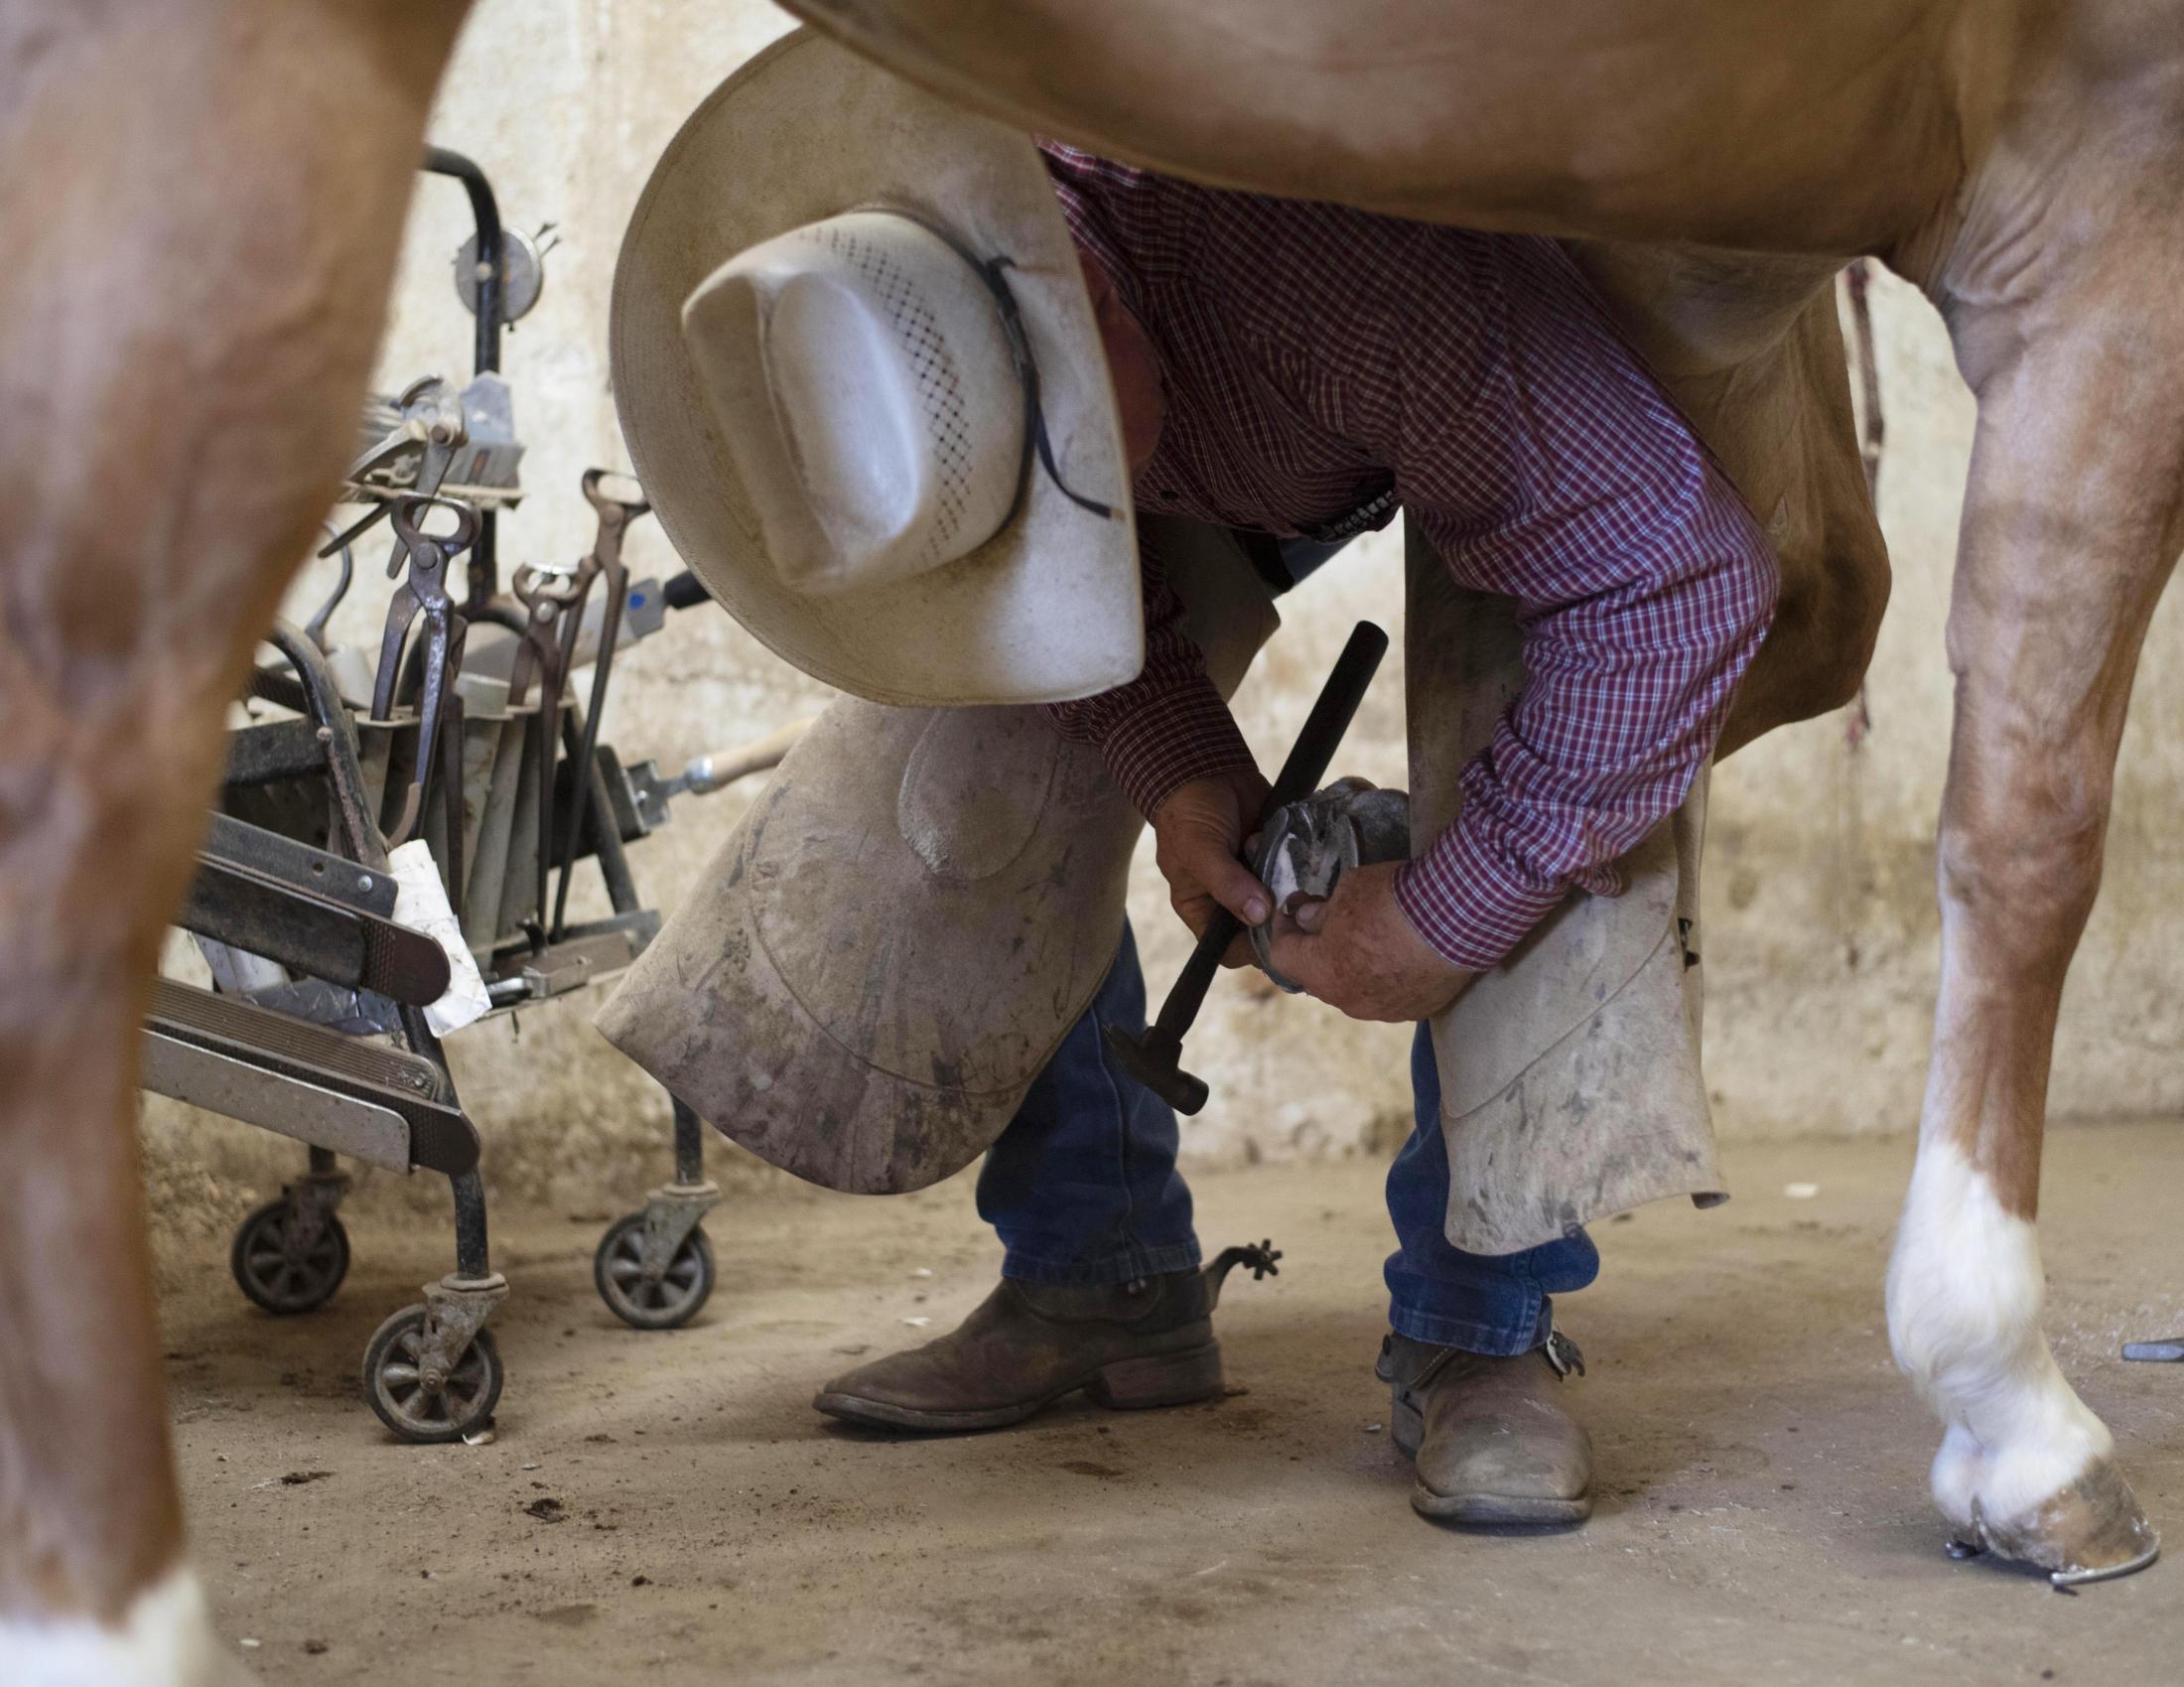 The horseman - Dudley puts a new shoe on a horse. The shoeing process is...